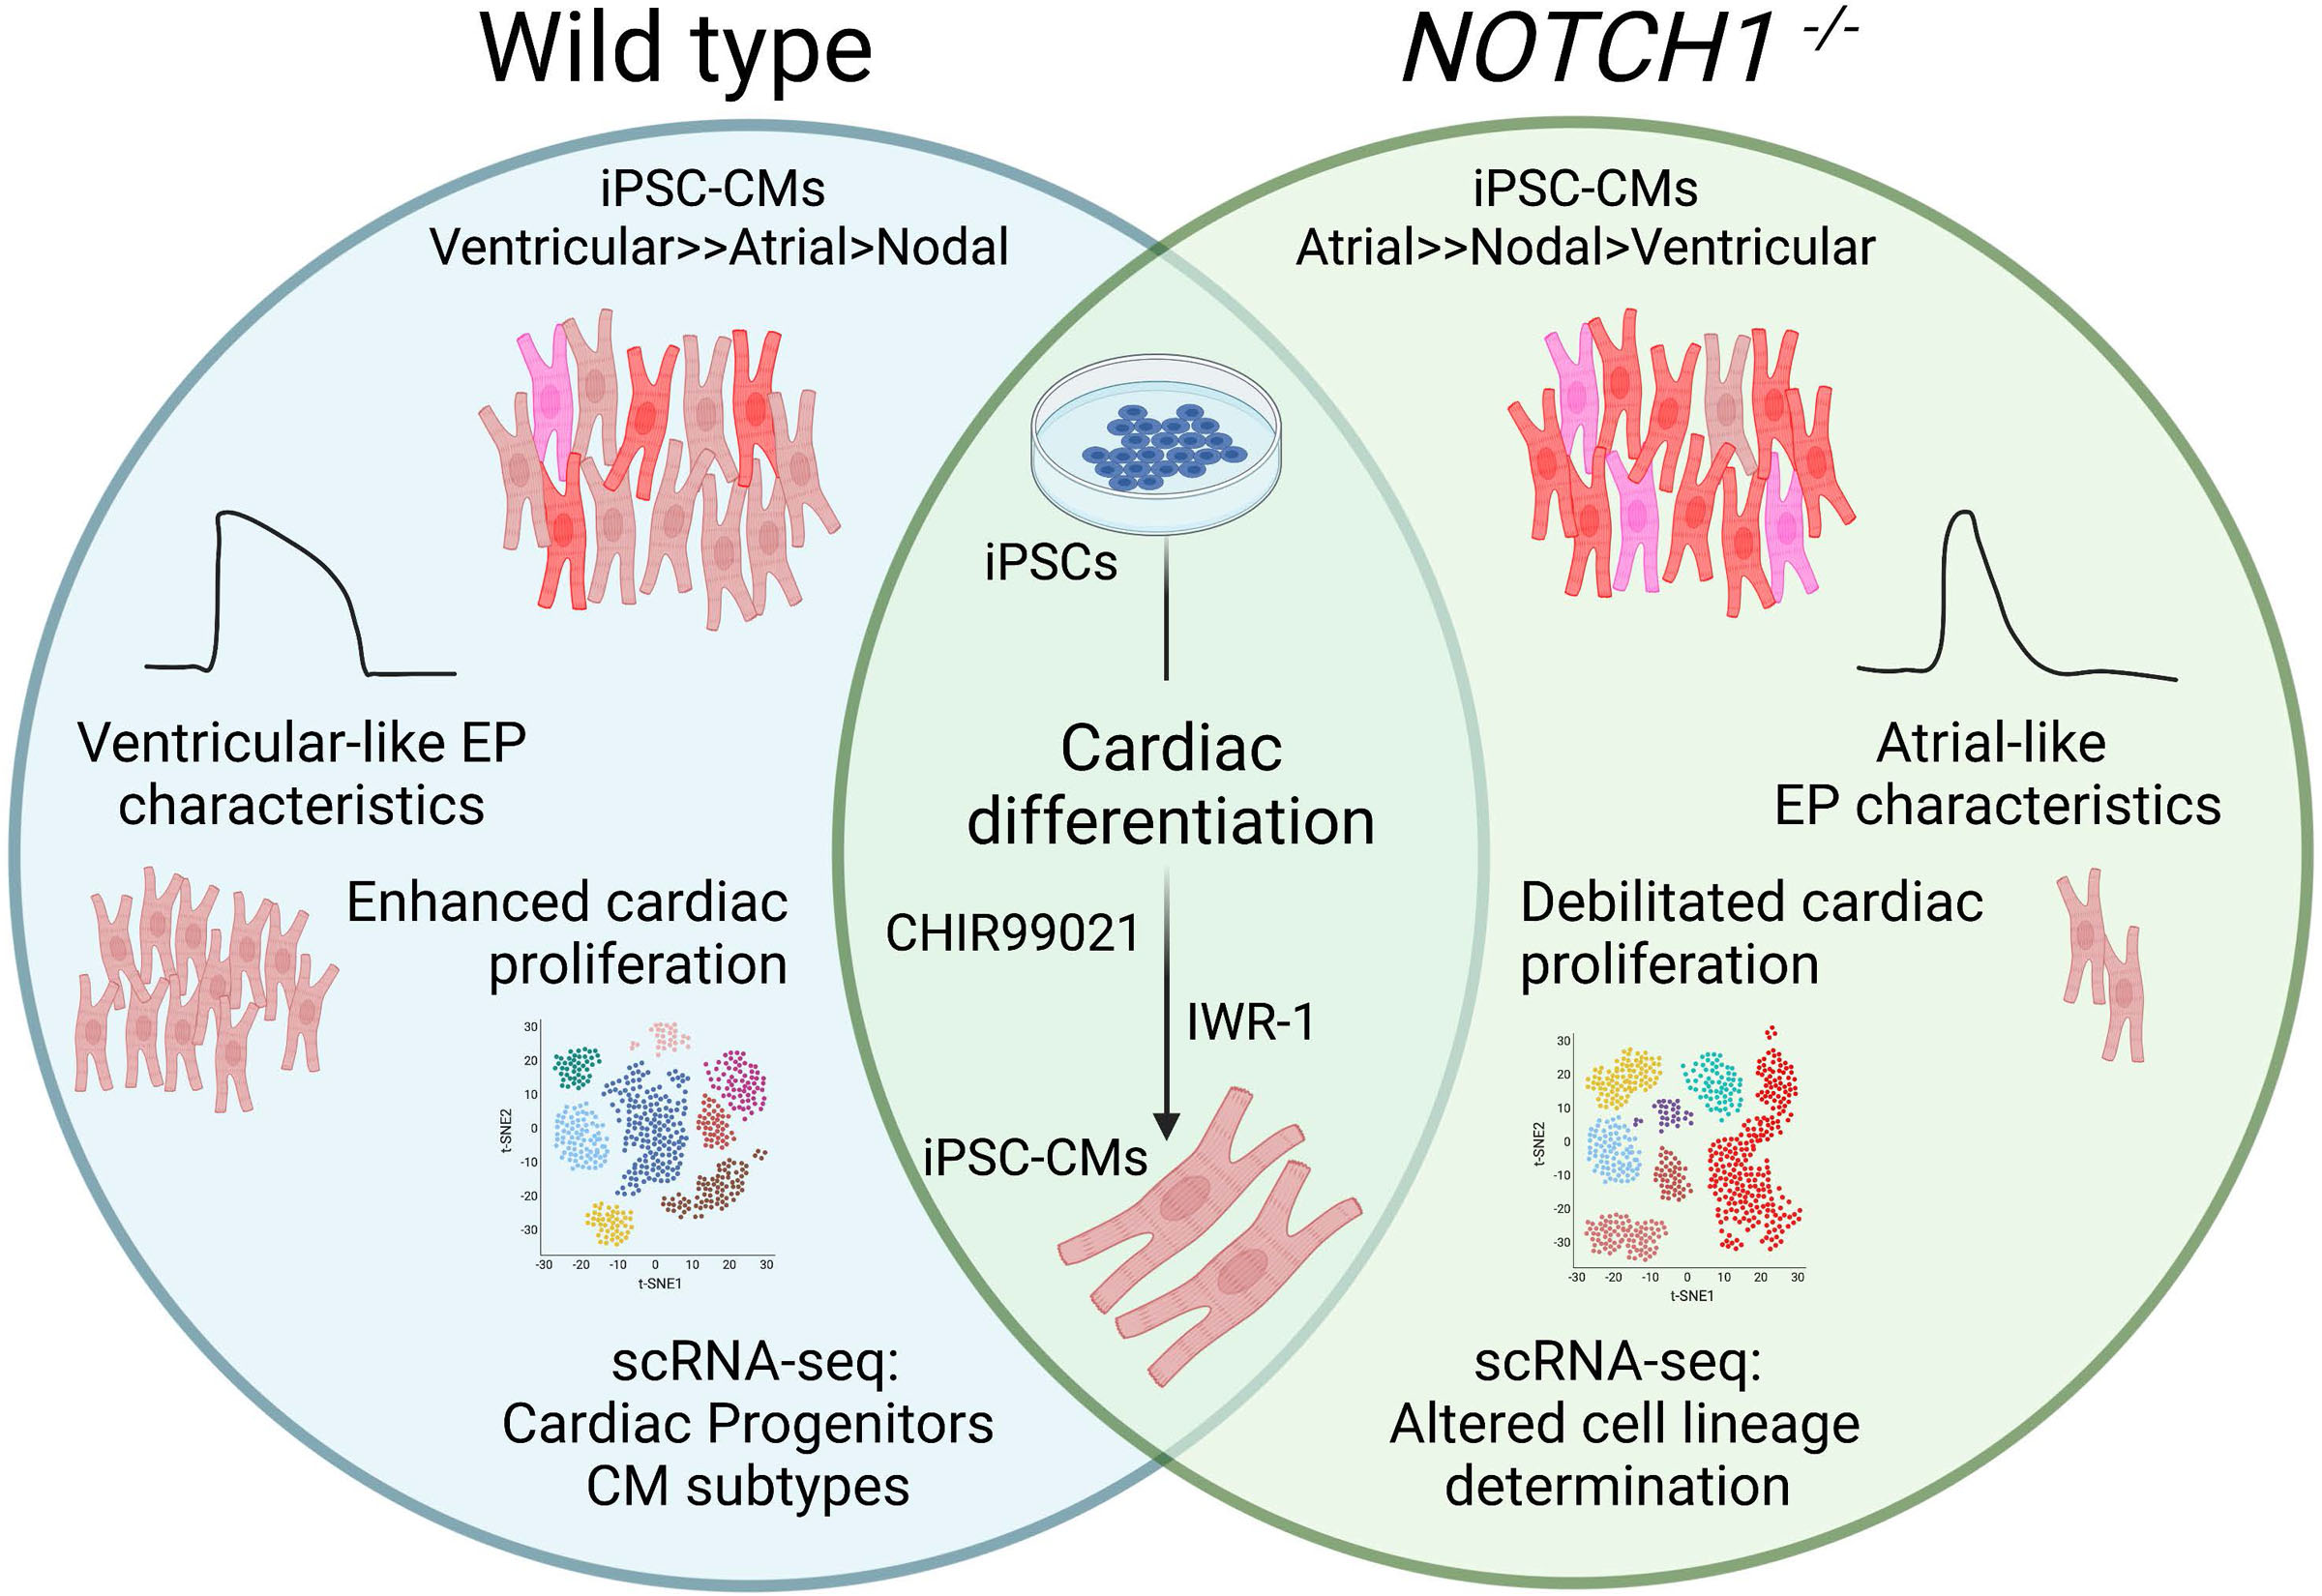 Impaired Human Cardiac Cell Development due to NOTCH1 Deficiency